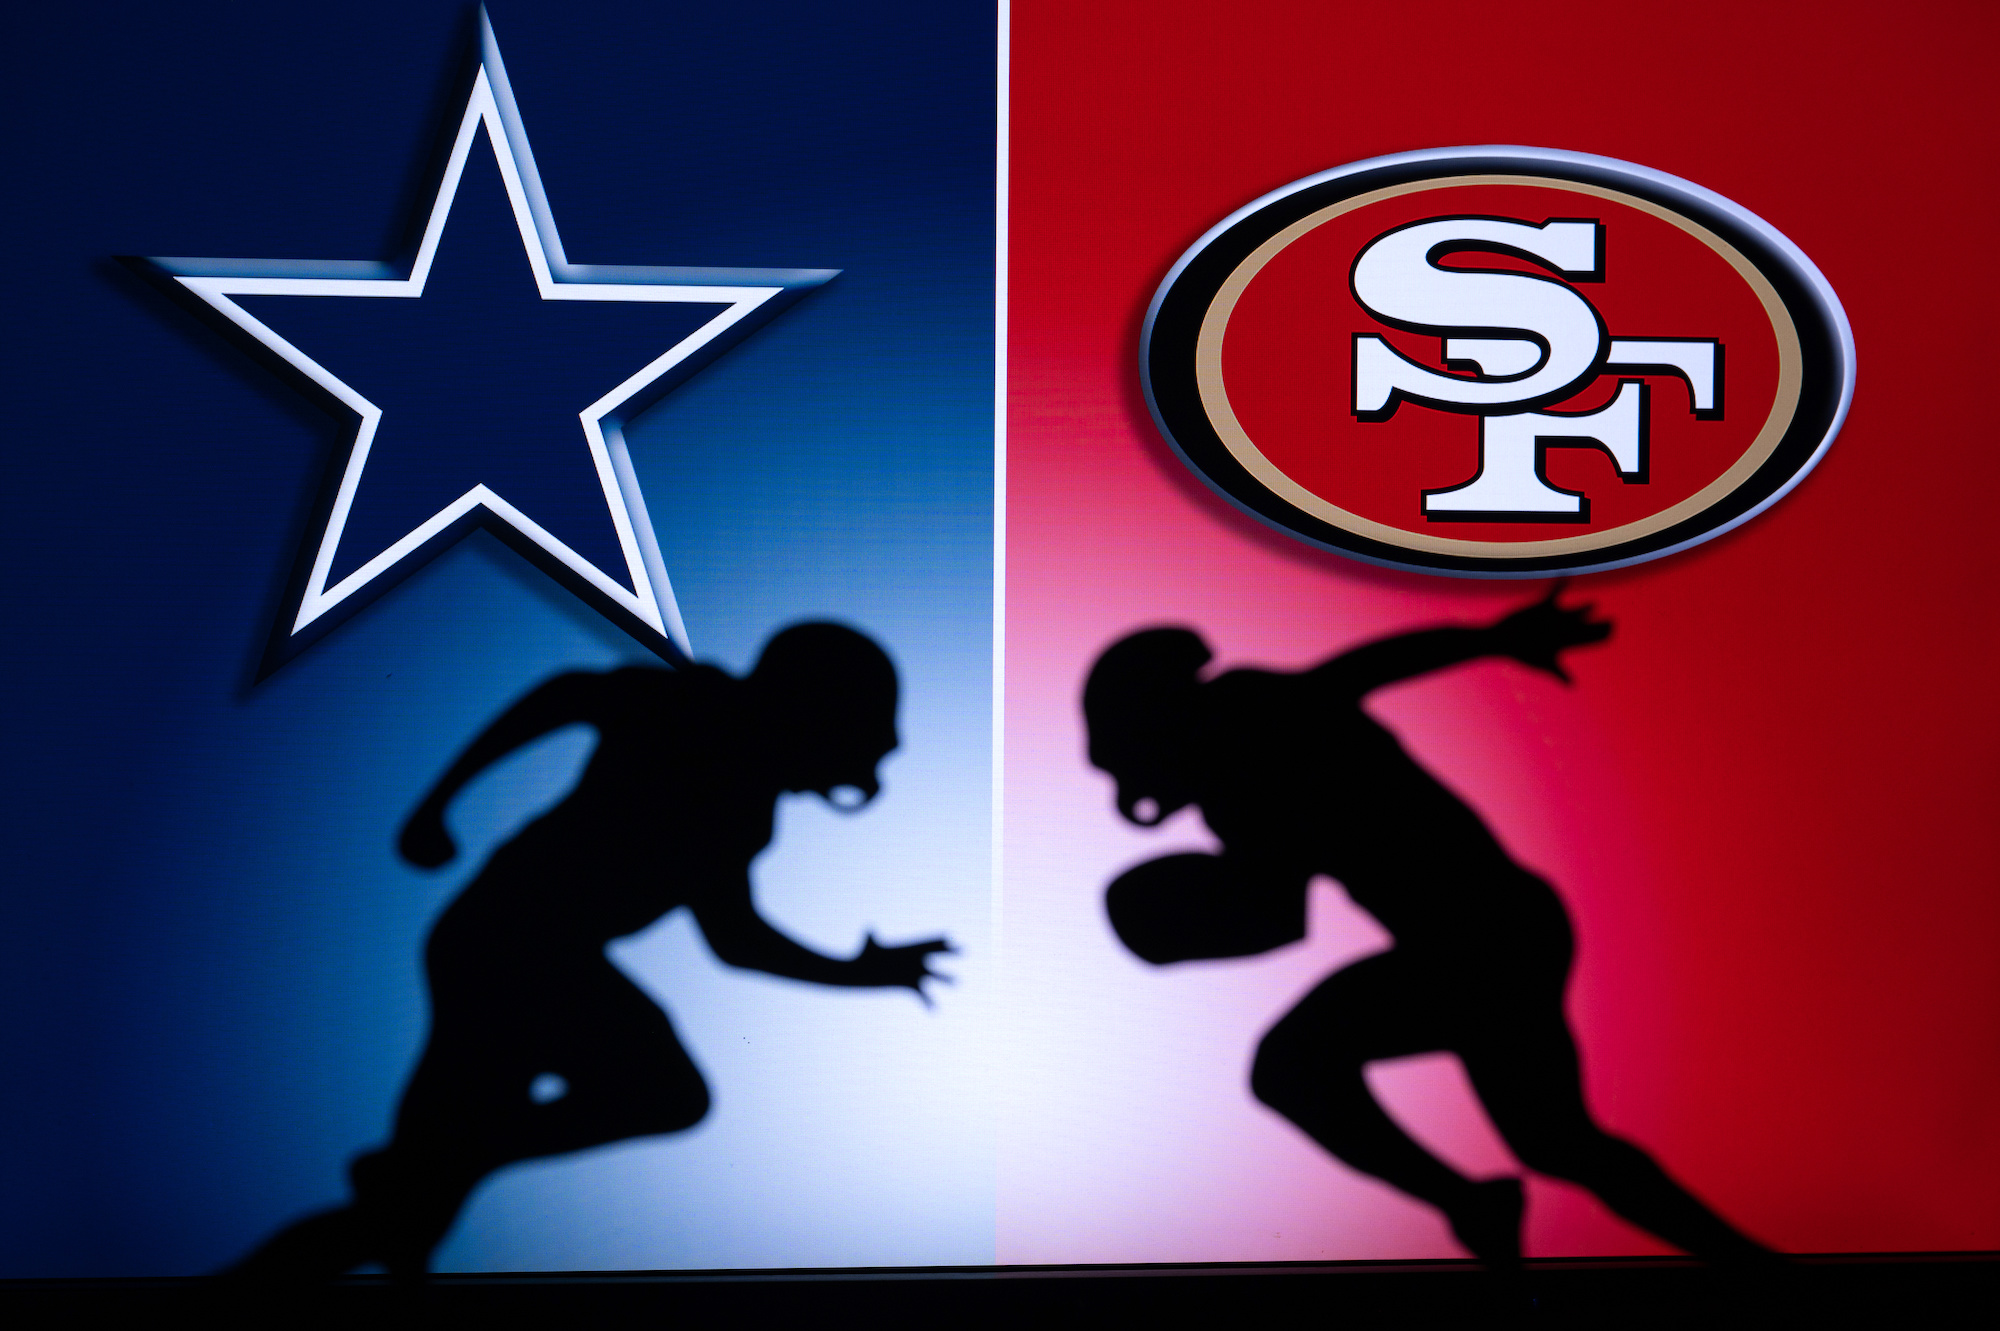 the cowboys and 49ers